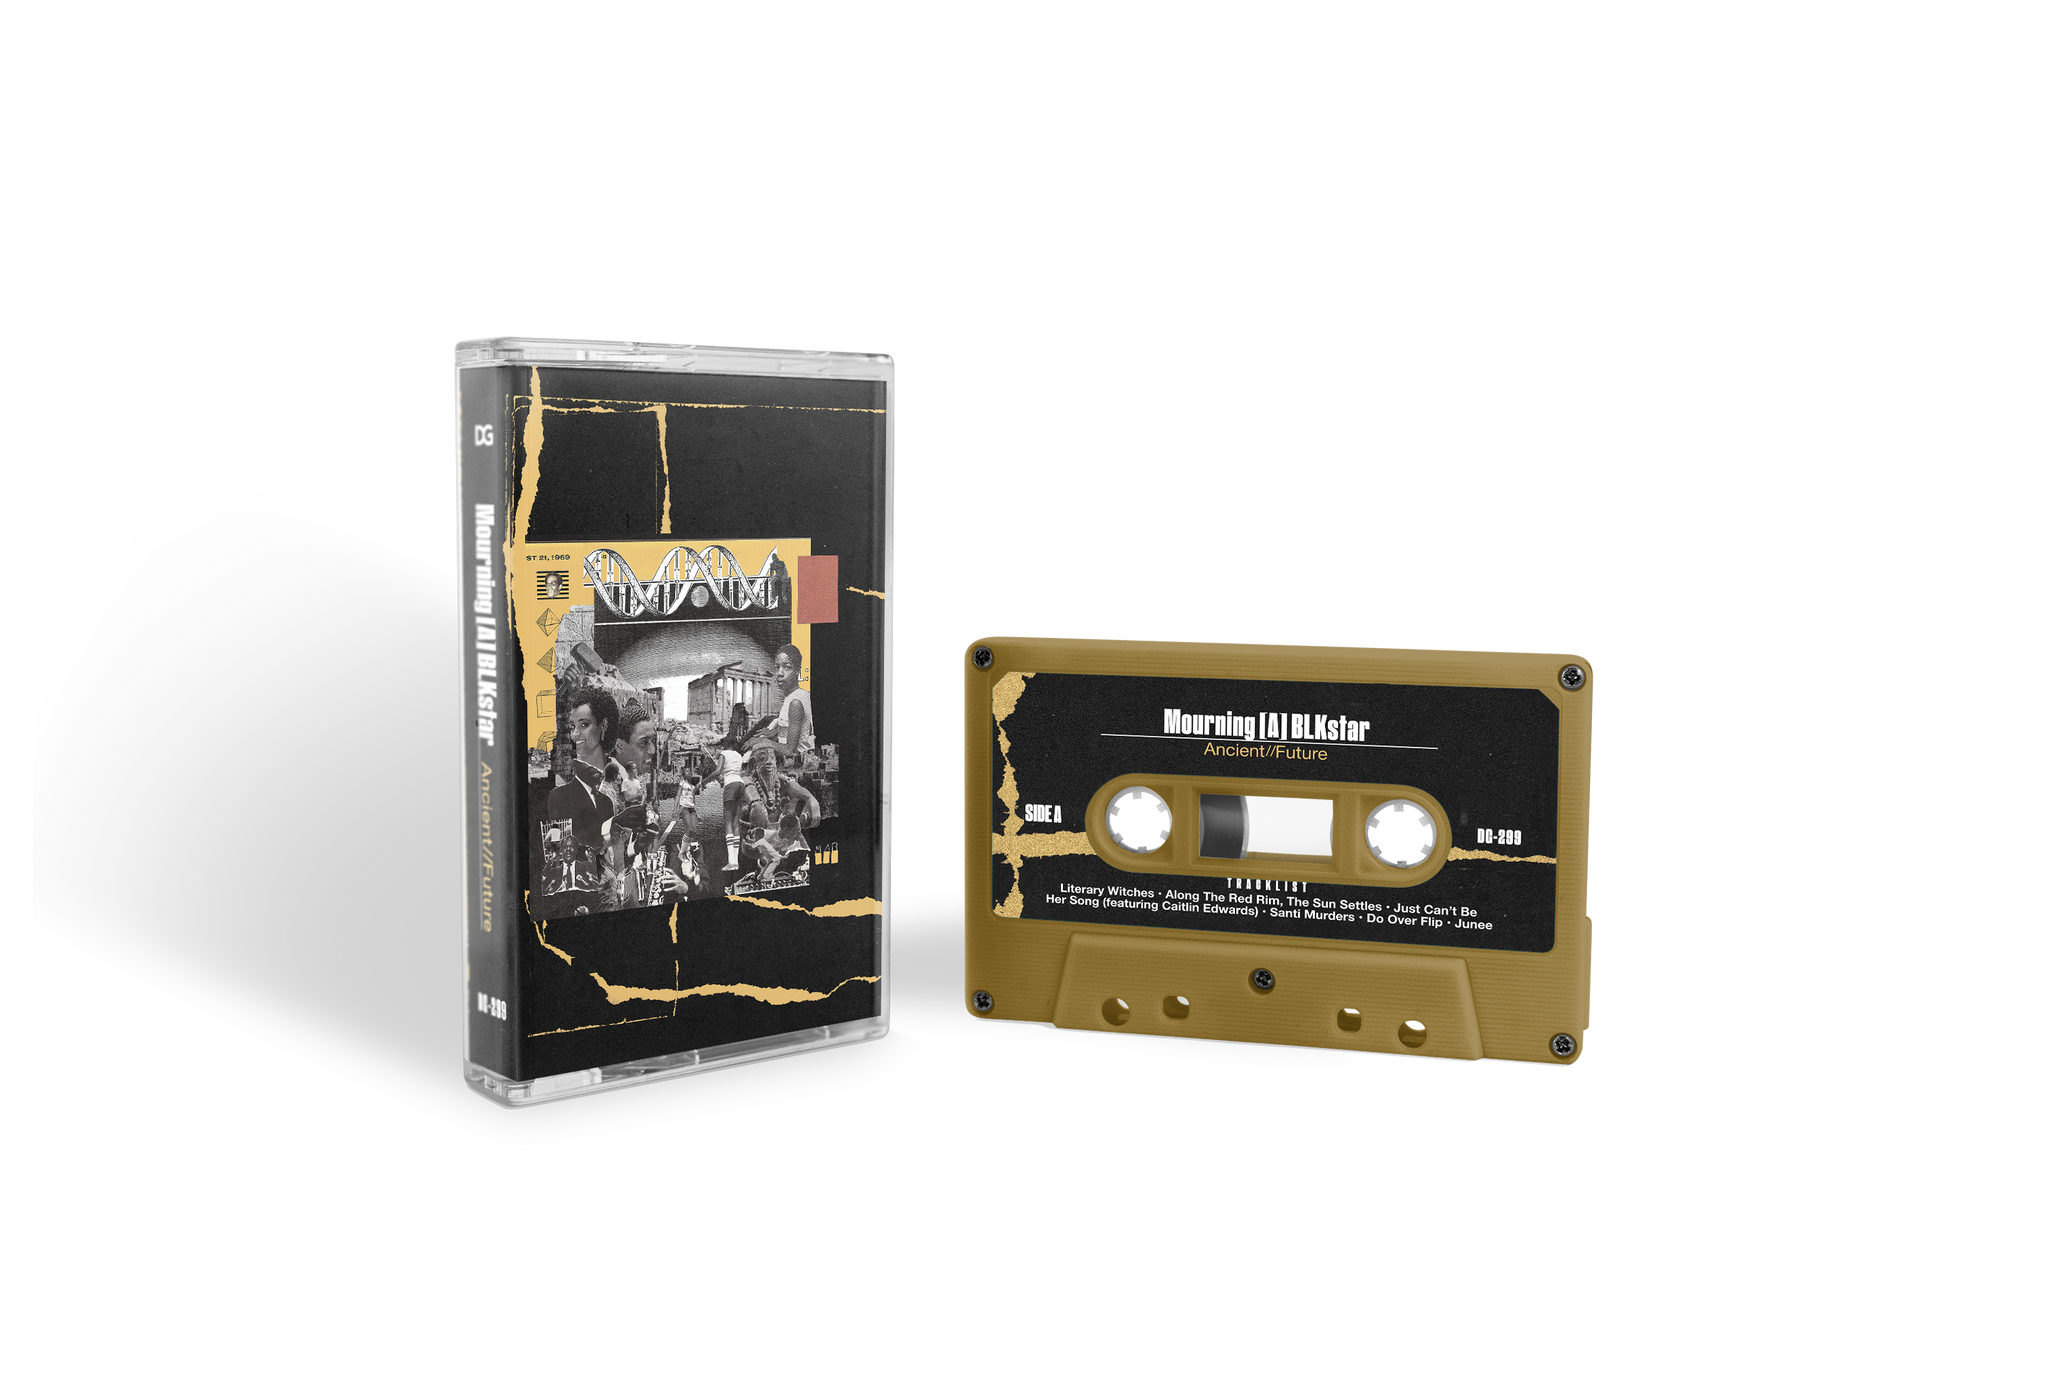 Mourning [A] BLKstar "Ancient Future" Cassette